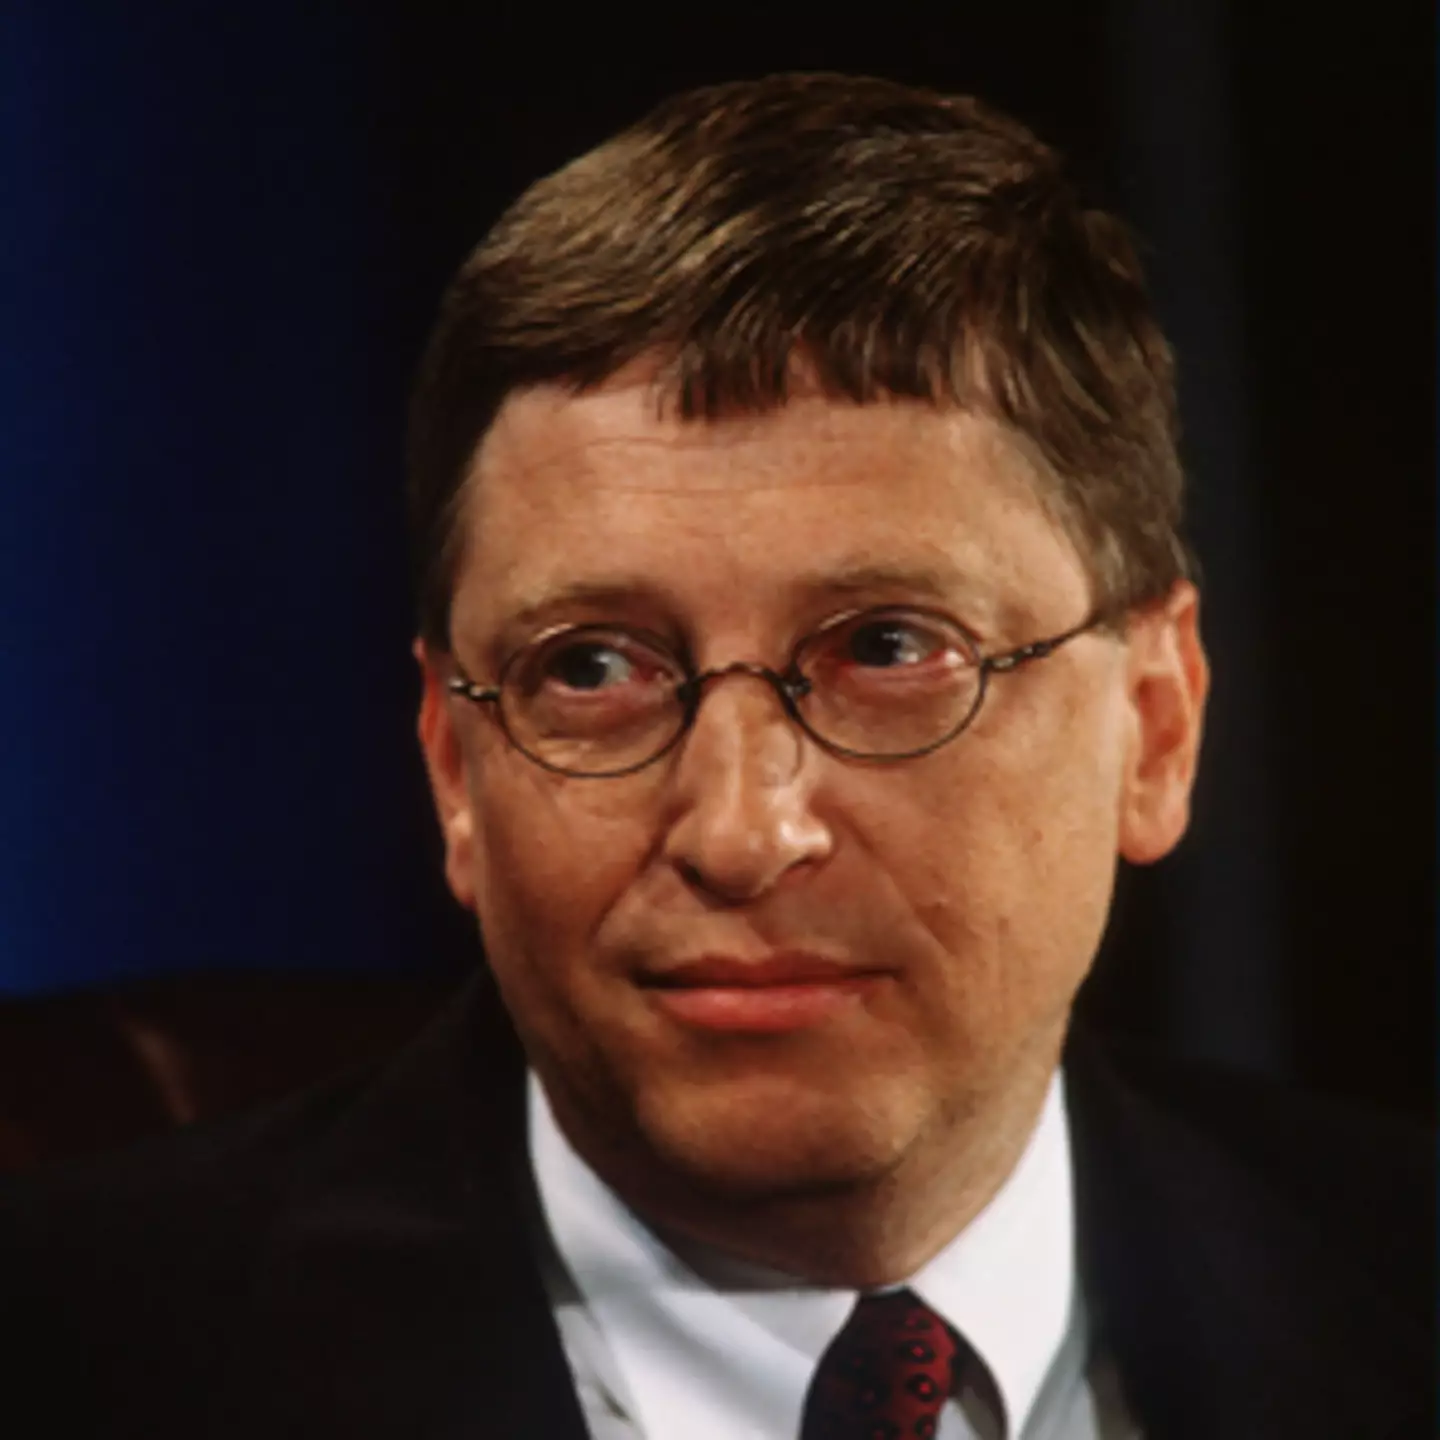 8 huge predictions Bill Gates made in 1999 that all came true